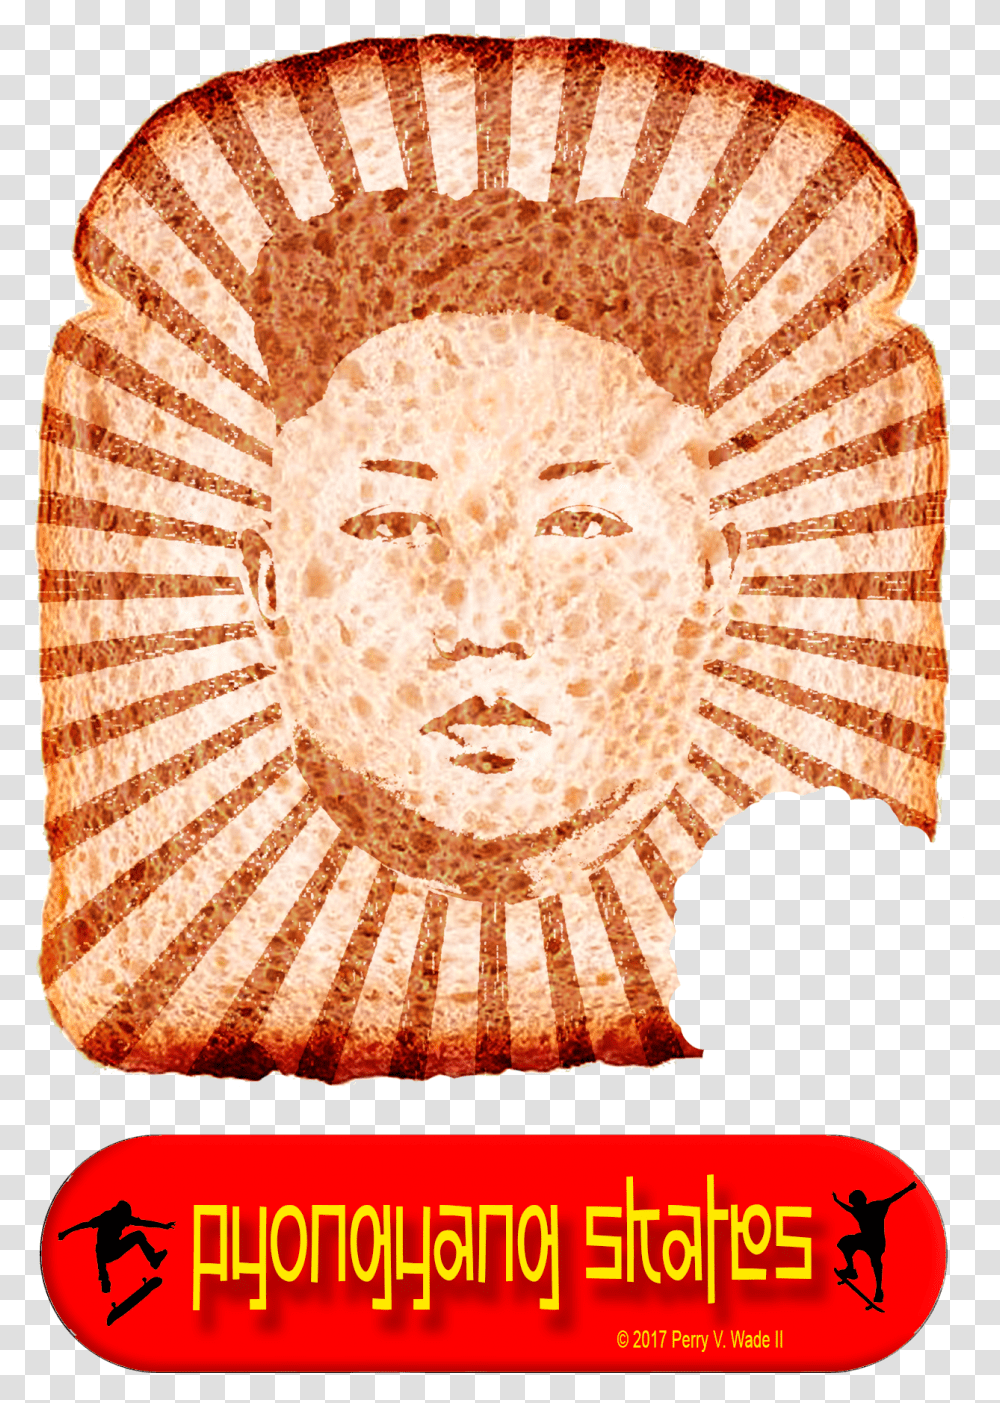 Kim Jong Un Toast Graphic Art By Perry V Wade Illustration, Rug, Bread, Food, French Toast Transparent Png